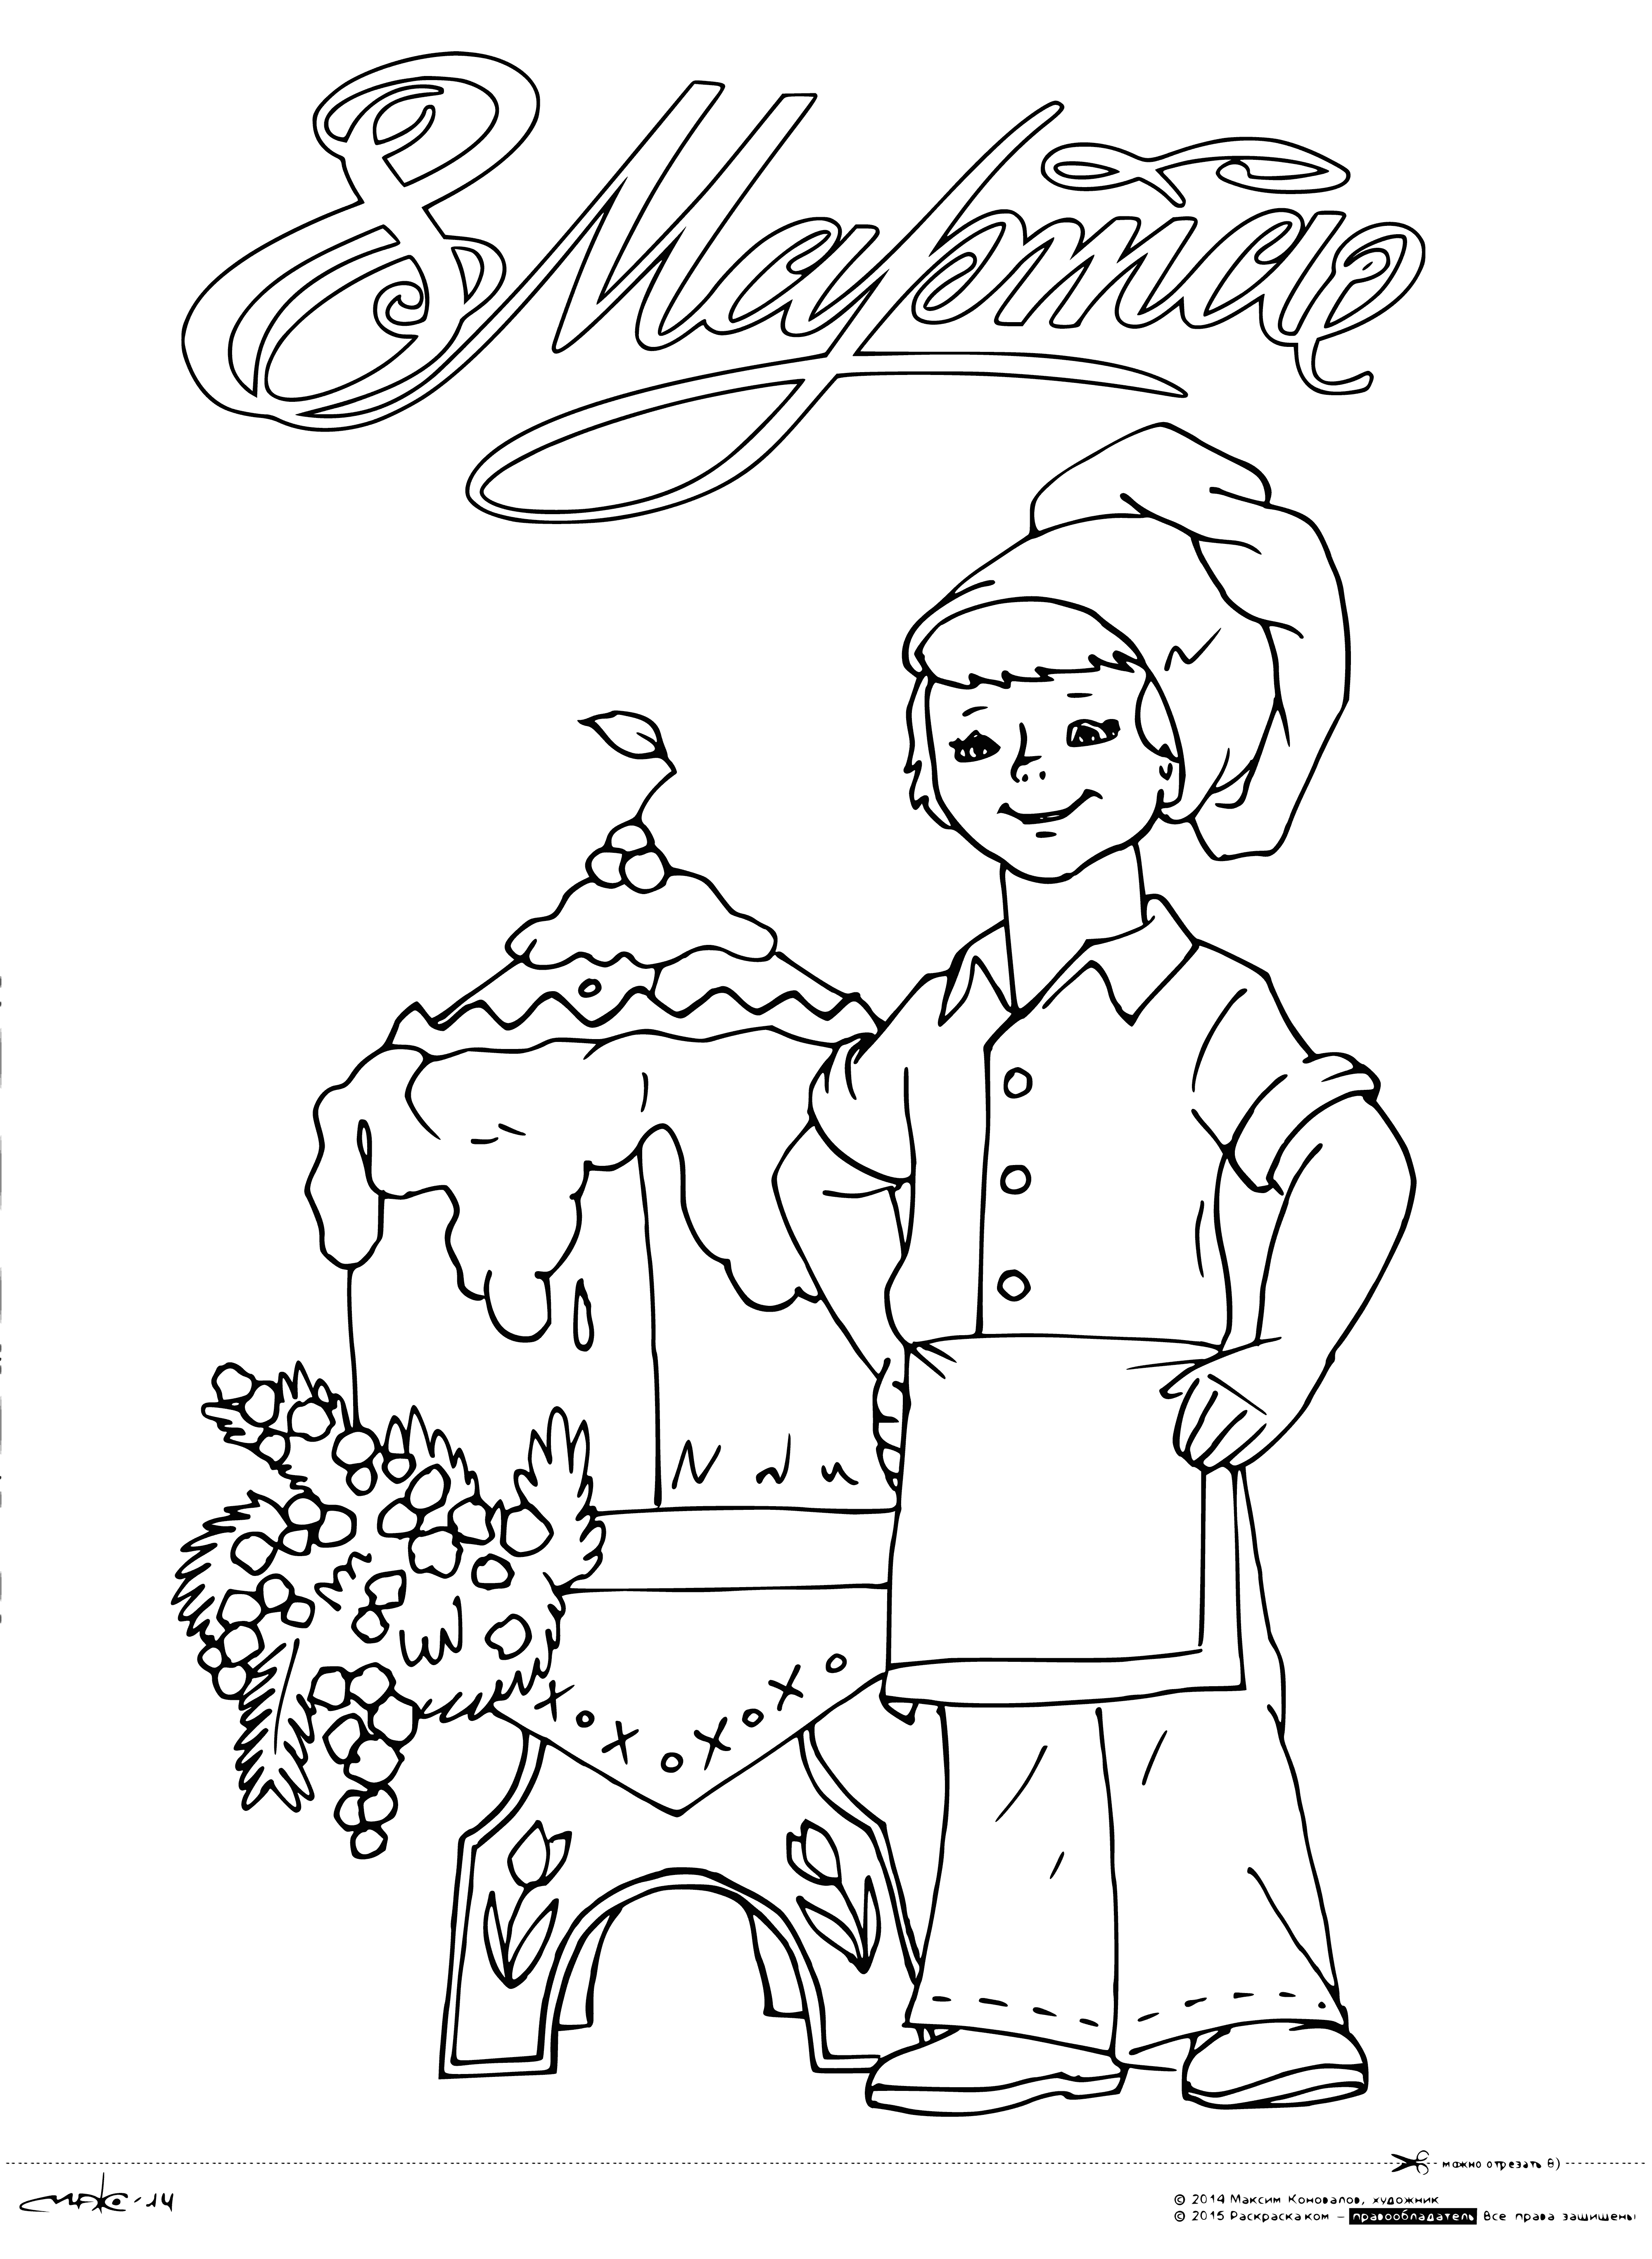 coloring page: Woman stands at table w/cake and candles, holding lighter as text says "Congrats Mom for Int'l Women's Day" #InternationalWomensDay